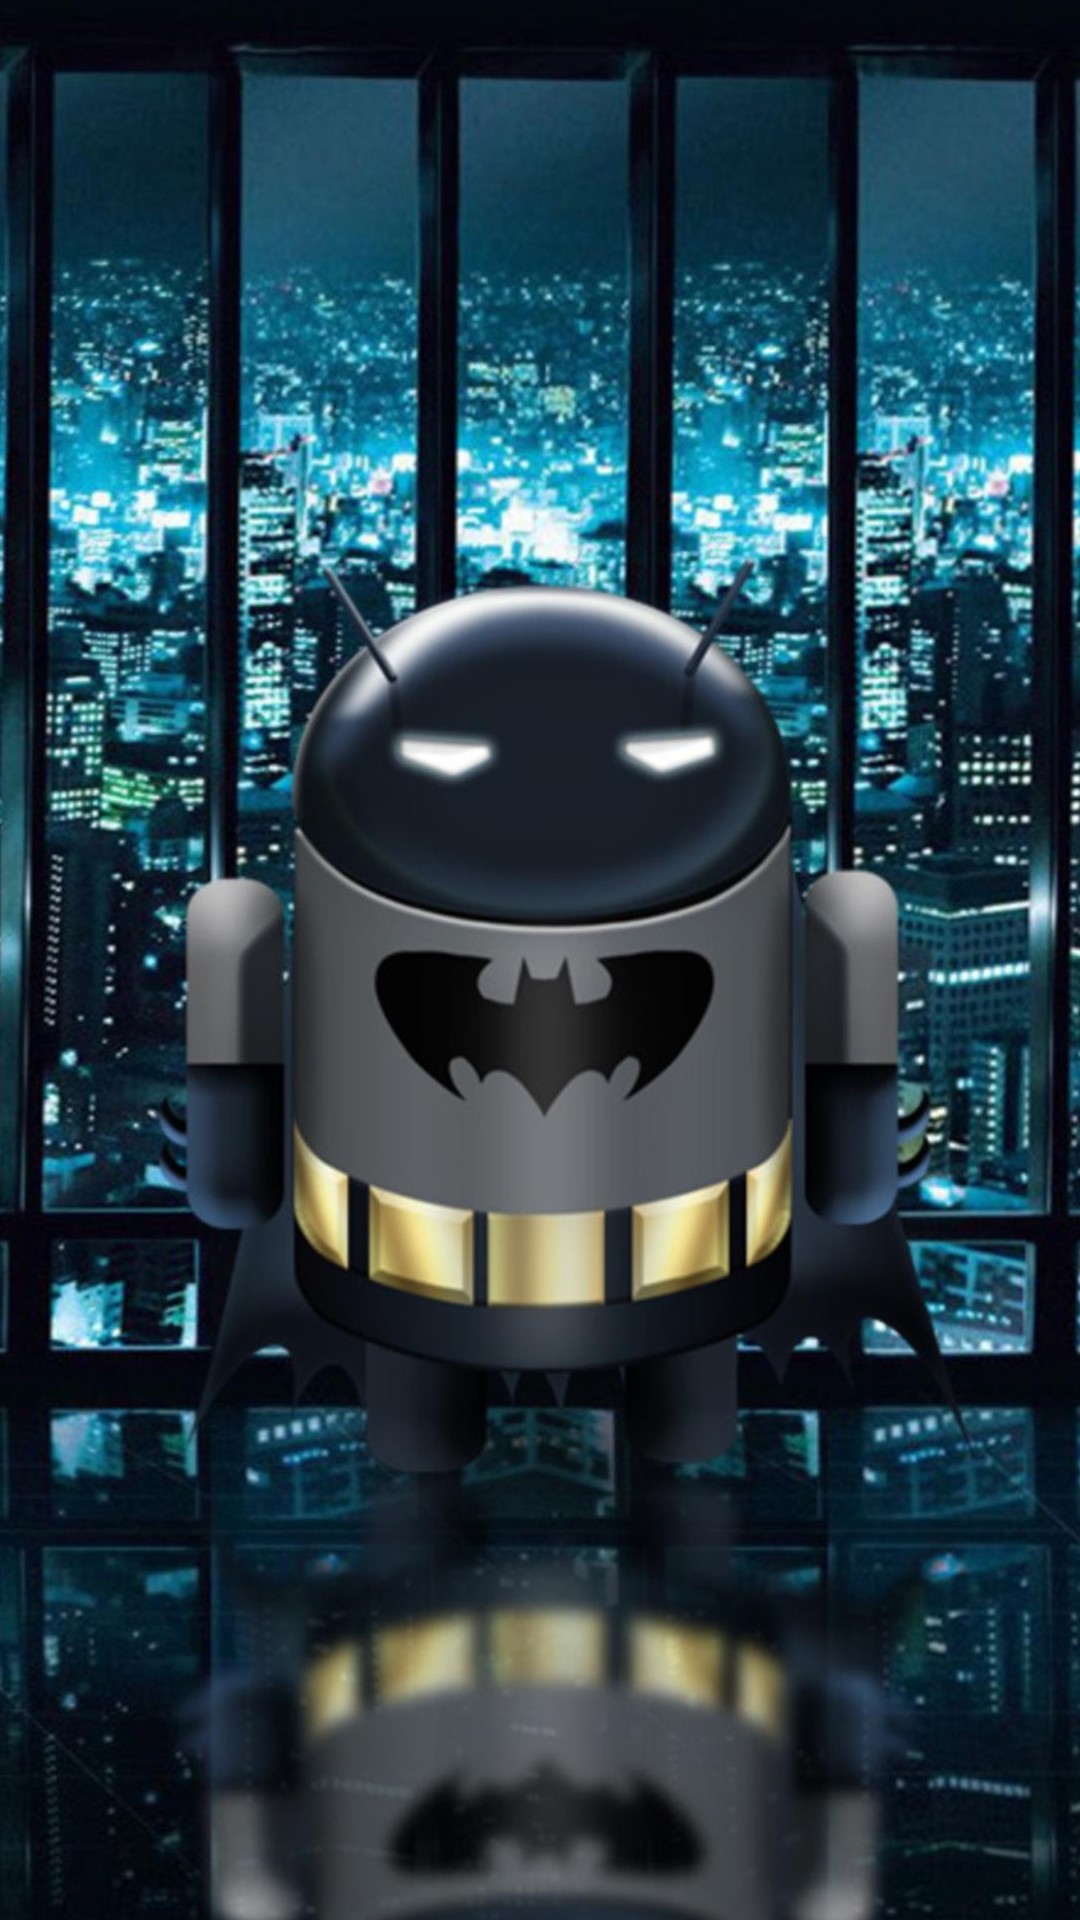 Free Download Batman Android Mobile Phone Hd Wallpaper 1080x19 1080x19 For Your Desktop Mobile Tablet Explore 47 Android Smartphone Wallpaper Android Smartphone Wallpaper Android Wallpaper For Smartphone Wallpapers Backgrounds